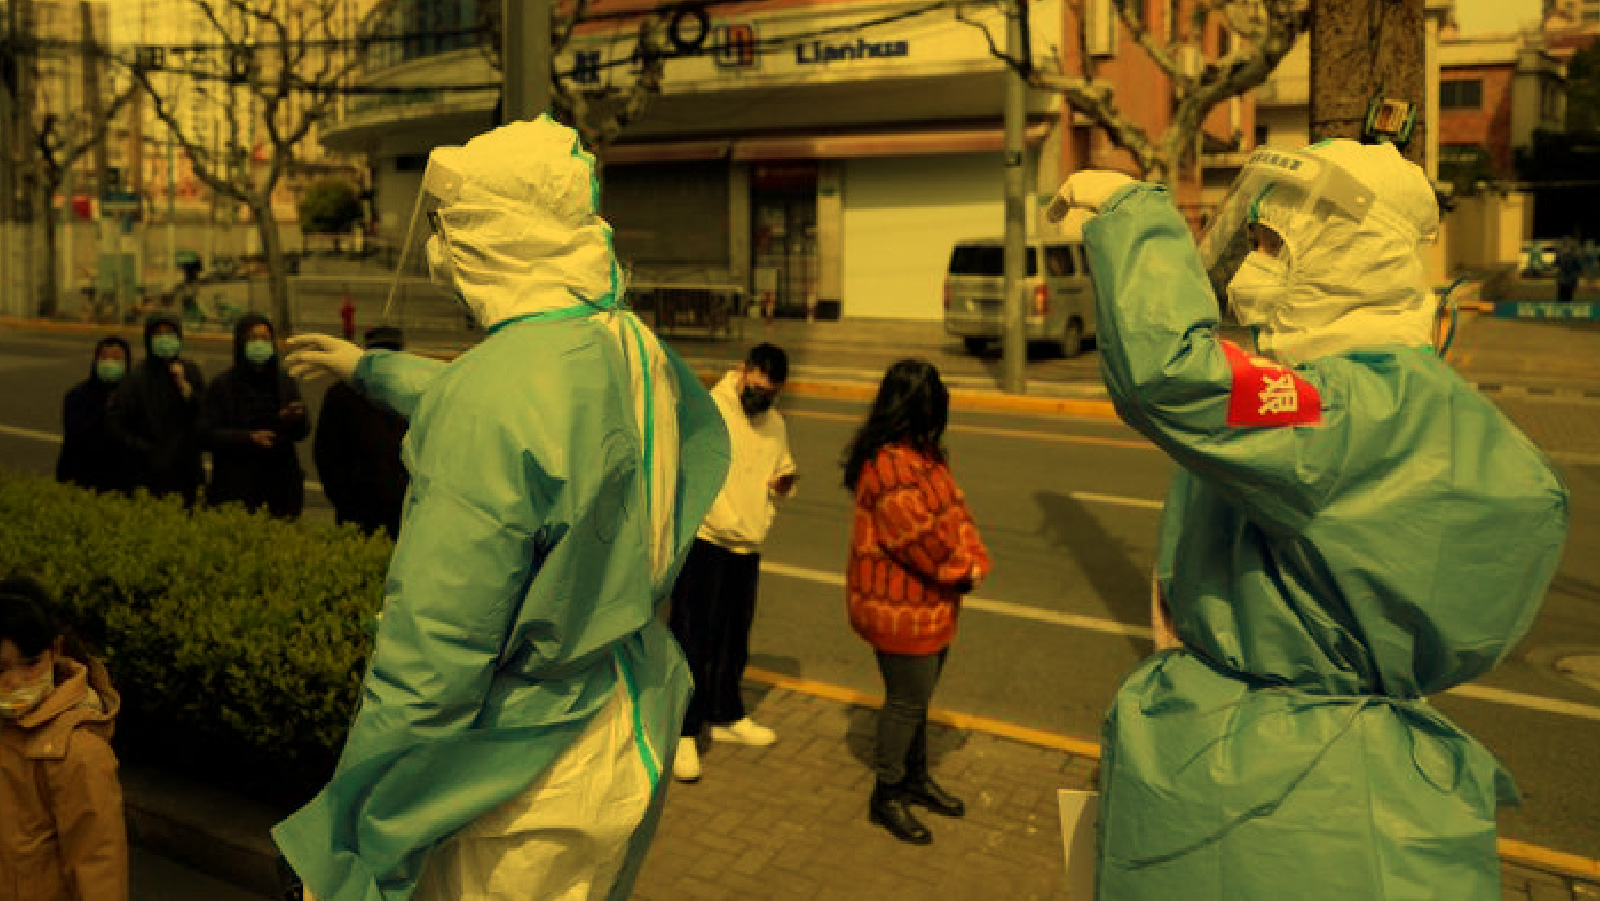 Workers in protective suits are seen next to residents lining up for nucleic acid testing, as the second stage of a two-stage lockdown to curb the spread of the coronavirus disease (COVID-19) begins in Shanghai, China April 1, 2022. Reuters